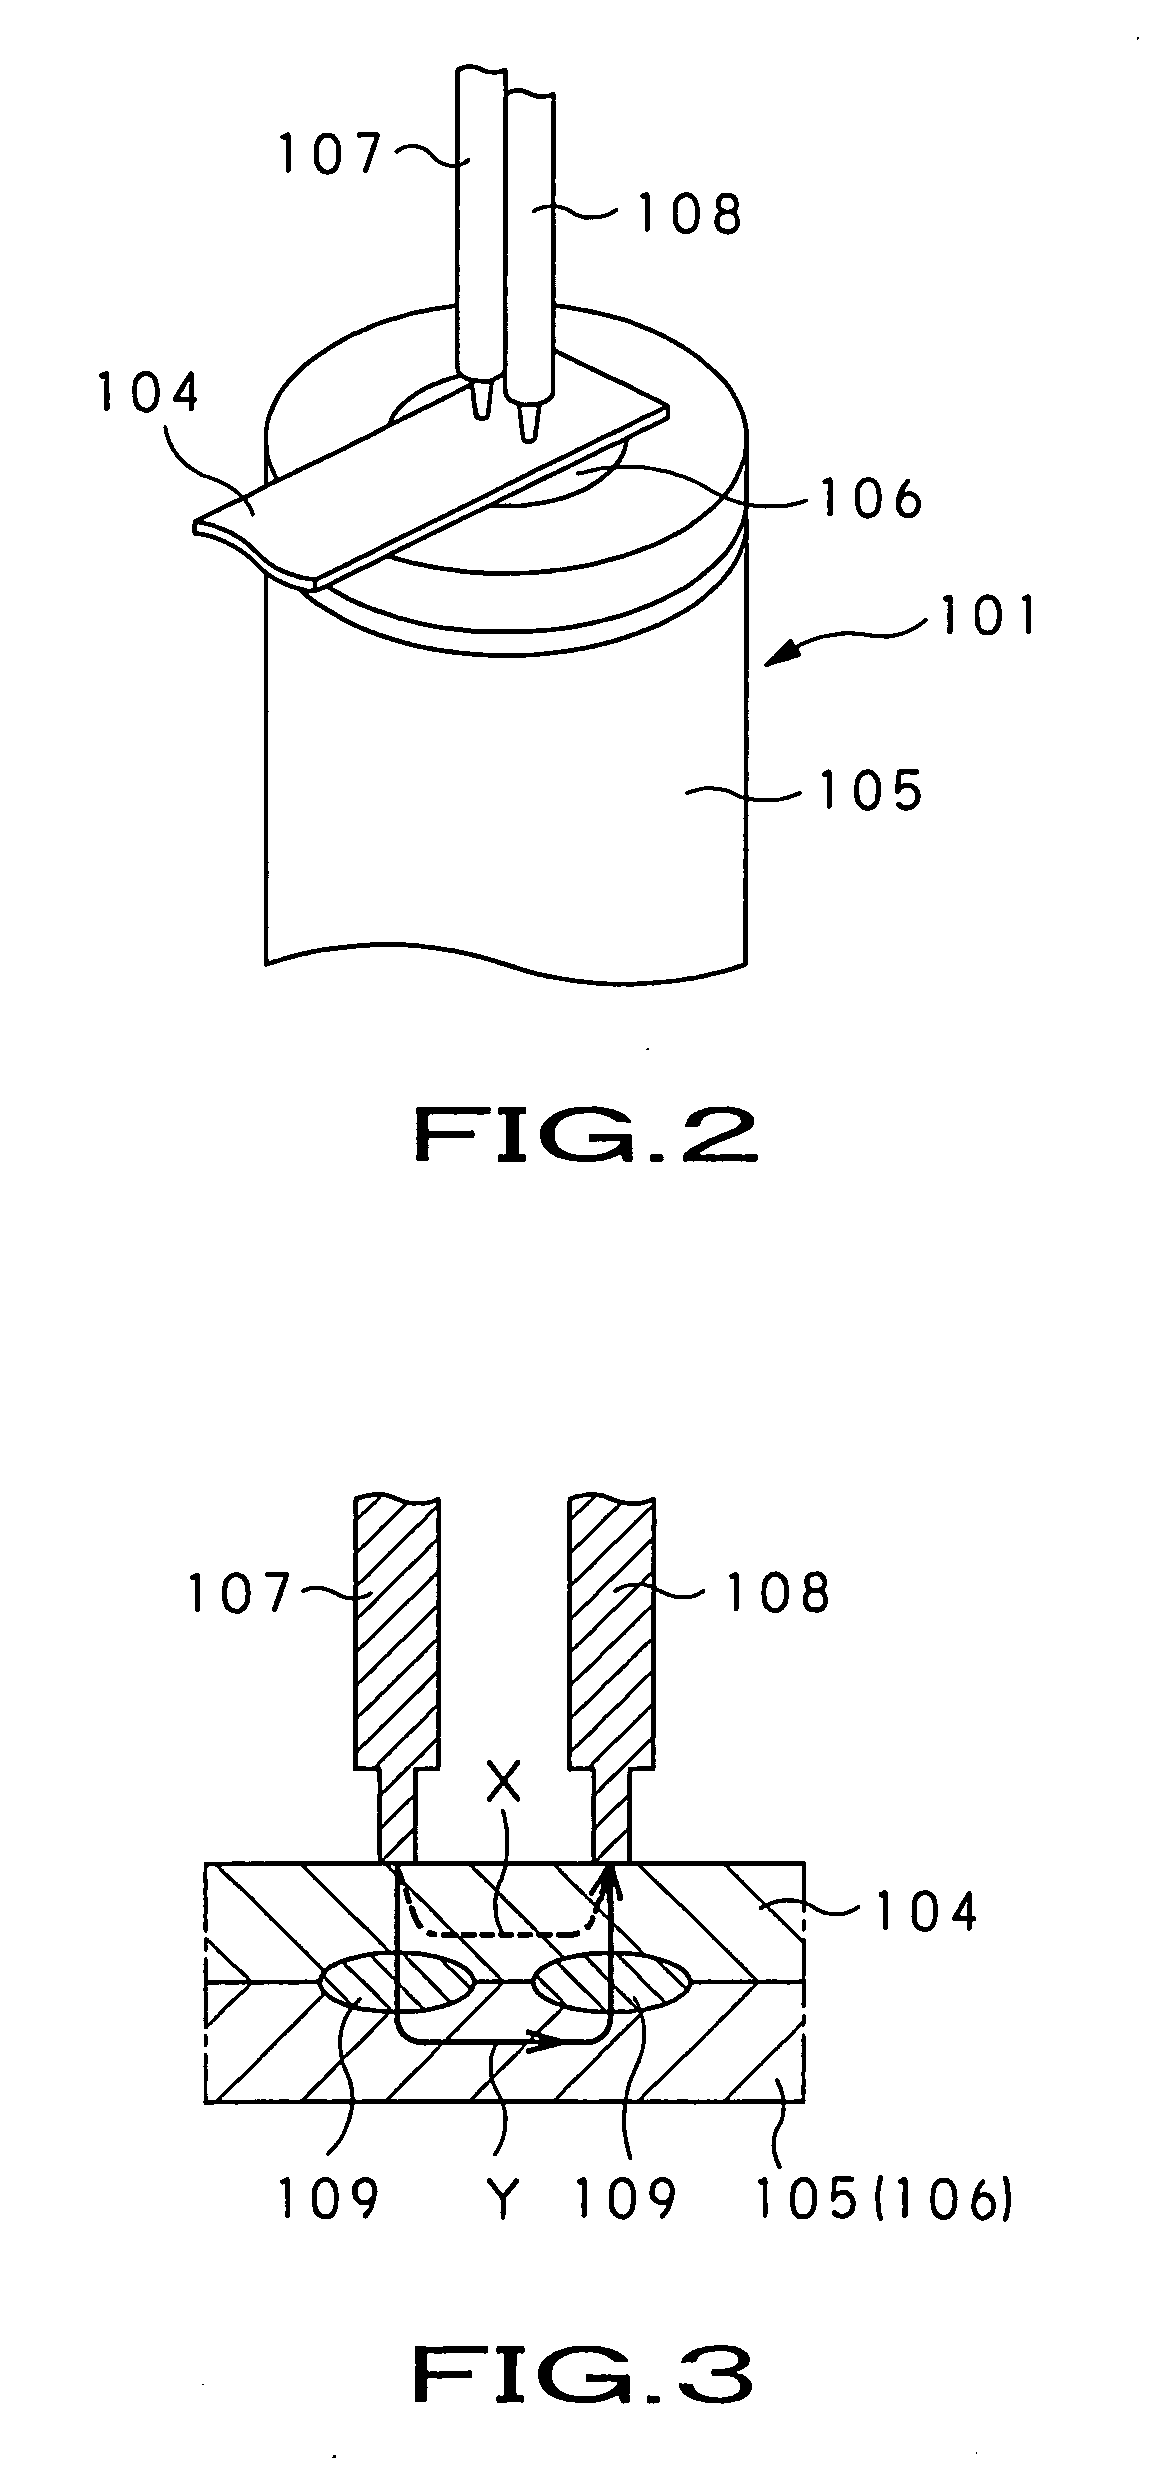 Lead terminal and power supply device